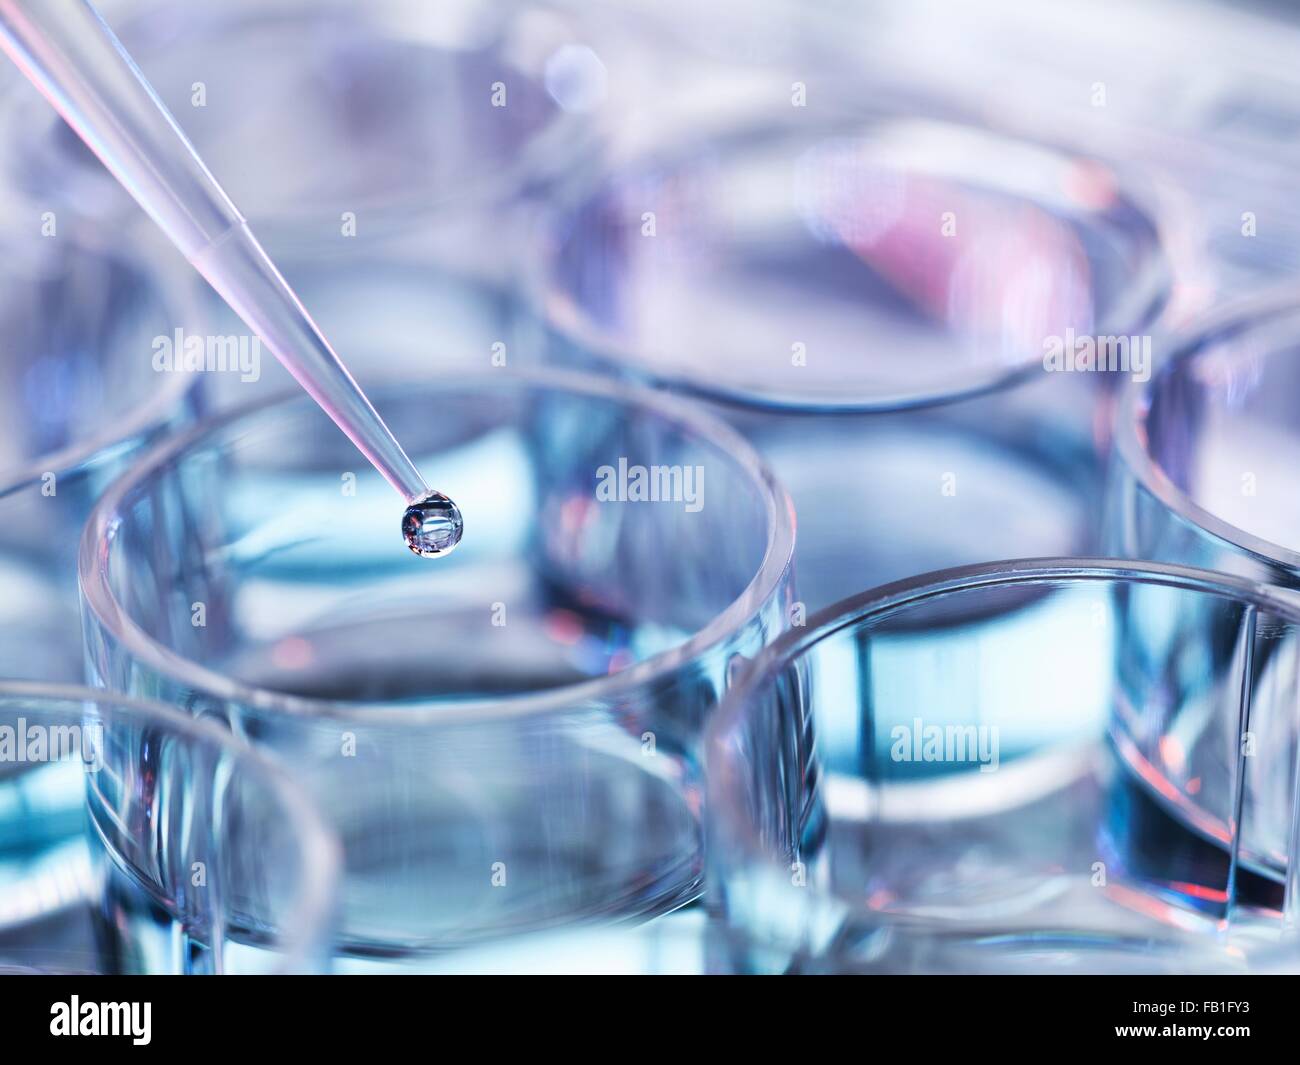 Pipetting droplets of liquid into multiwell dish, high angle view Stock Photo